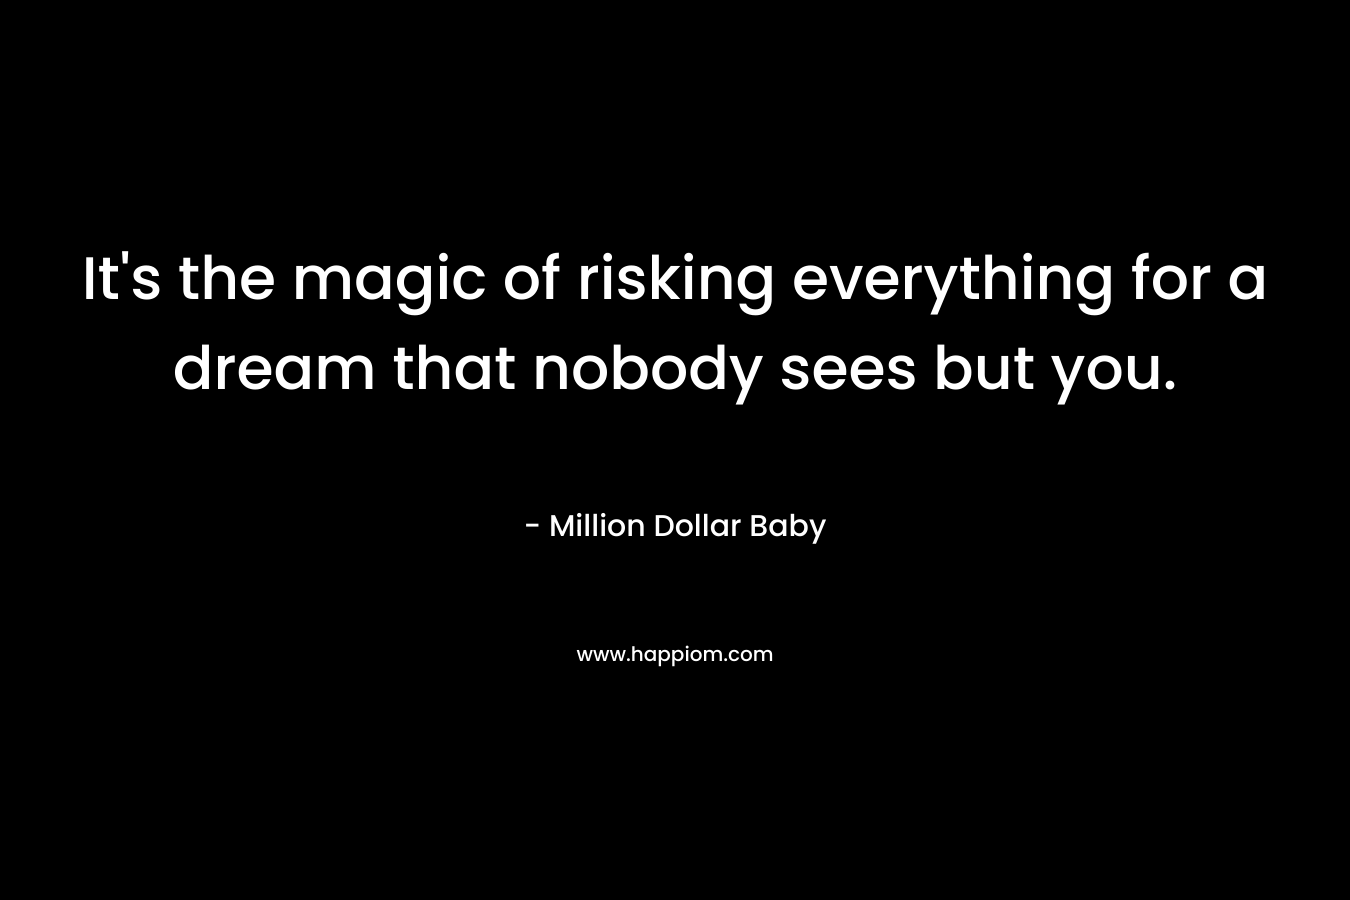 It's the magic of risking everything for a dream that nobody sees but you.